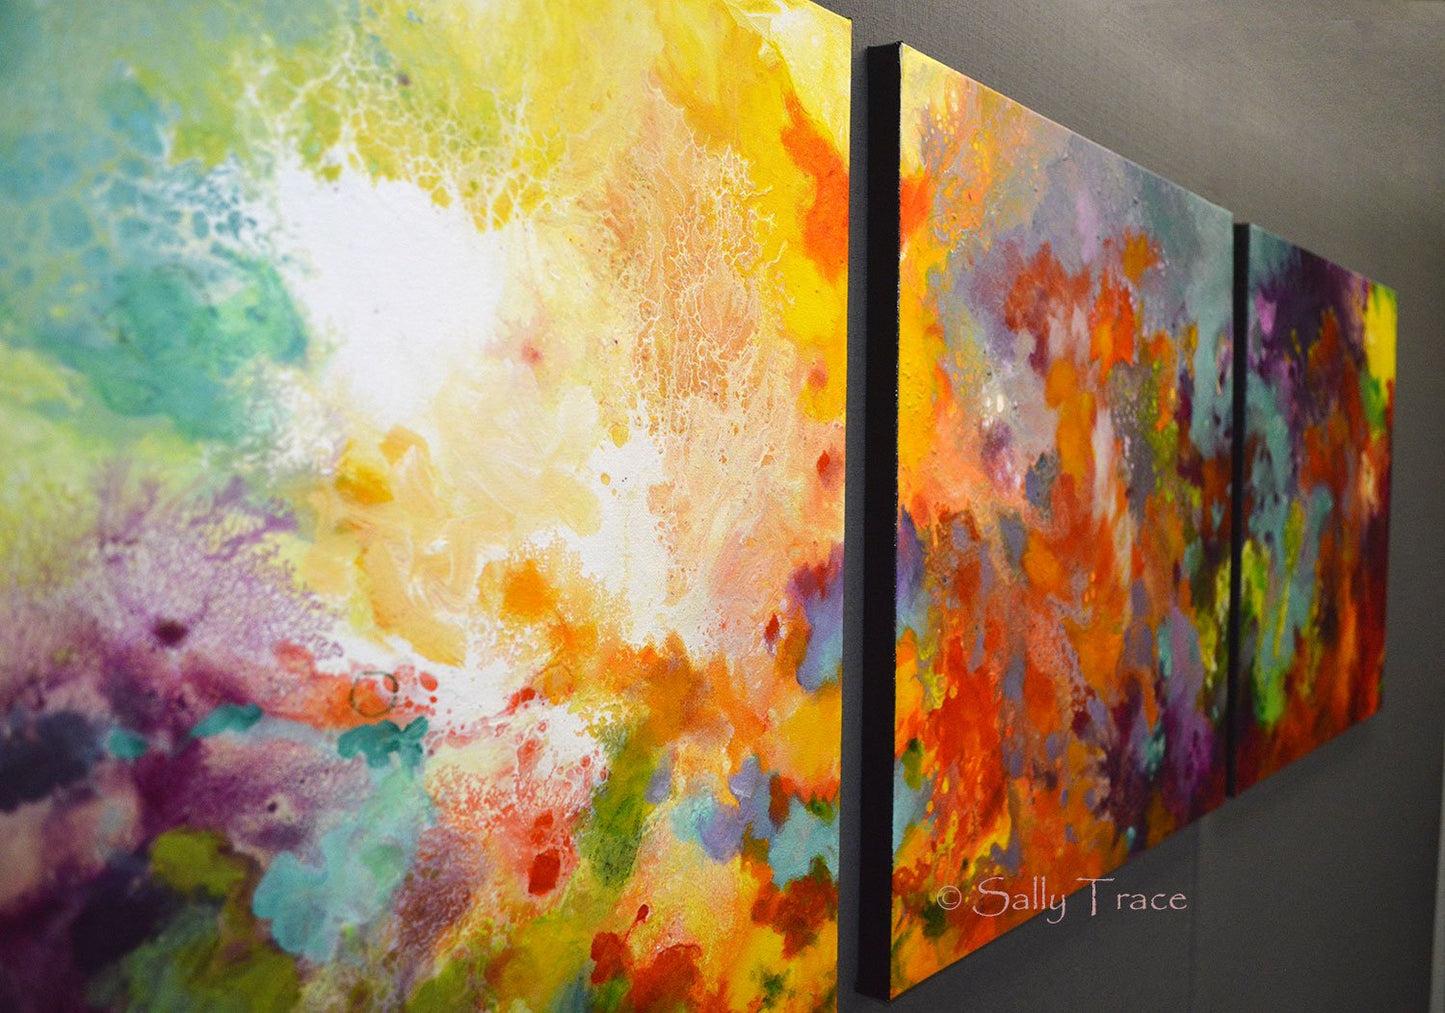 Momentum, original abstract triptych paintings. Three 20x20 inch paintings, acrylic on canvas. A richly detailed fluid painting with light texture, close-up view